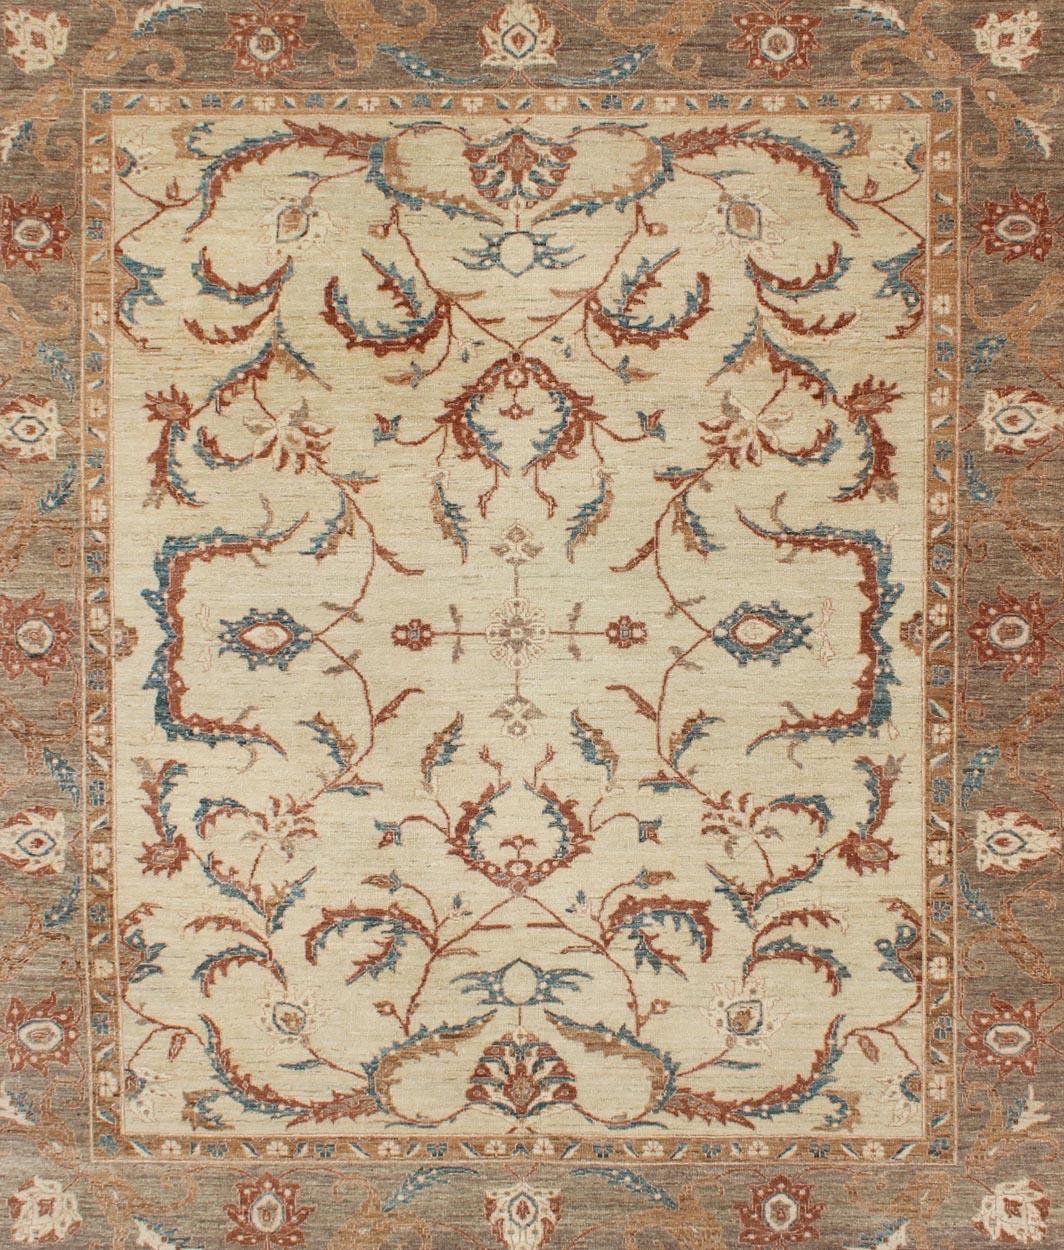 Sultanabad Fine Afghanistan Made Rug in Earthy Tones of Brown, Taupe, Blue, and Coral For Sale